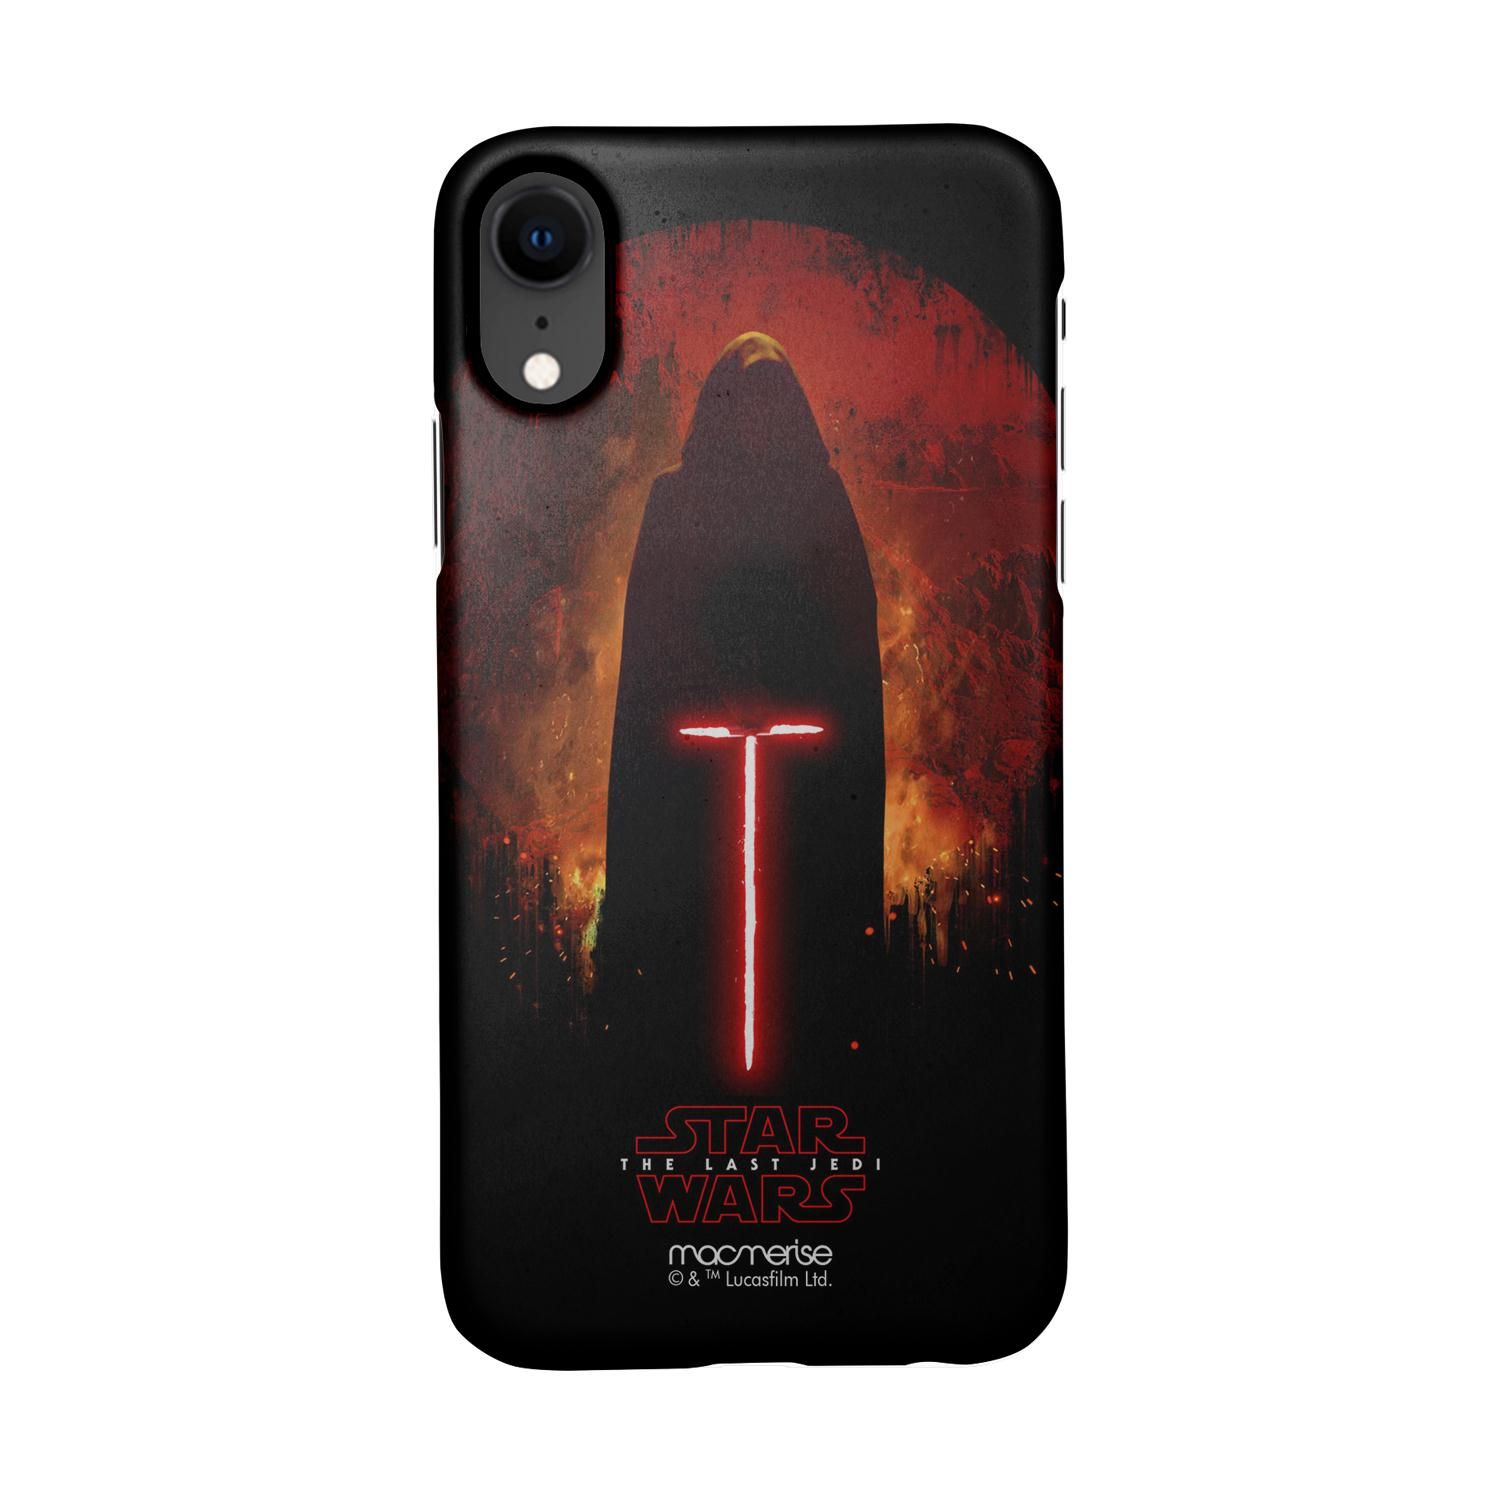 Buy Embrace The Darkness Within - Sleek Phone Case for iPhone XR Online